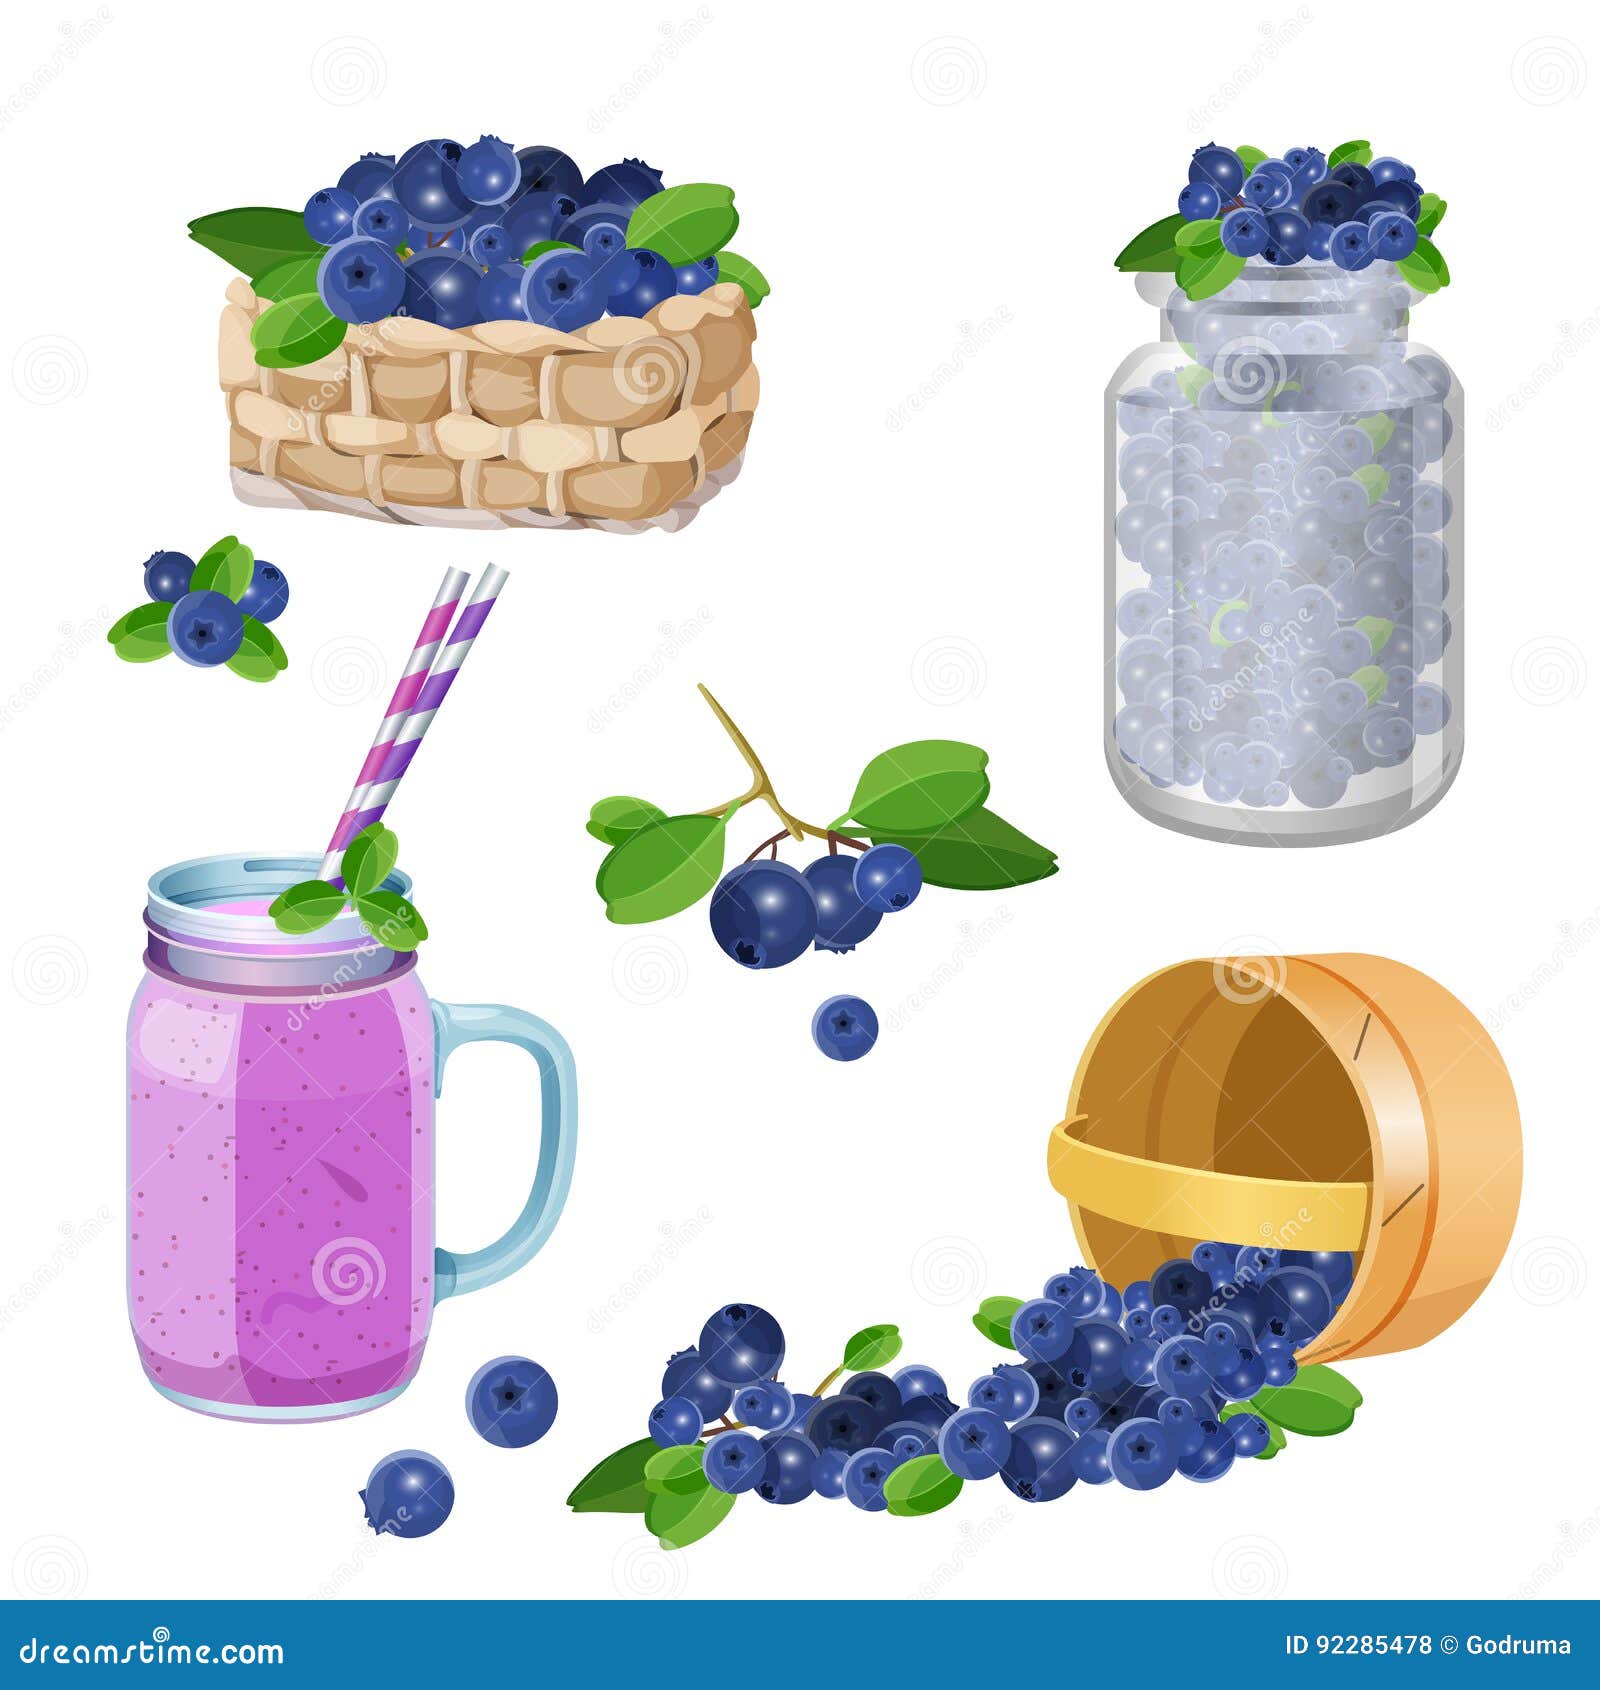 Download Wooden Underlying Basket With Blueberries Realistic Vector ...